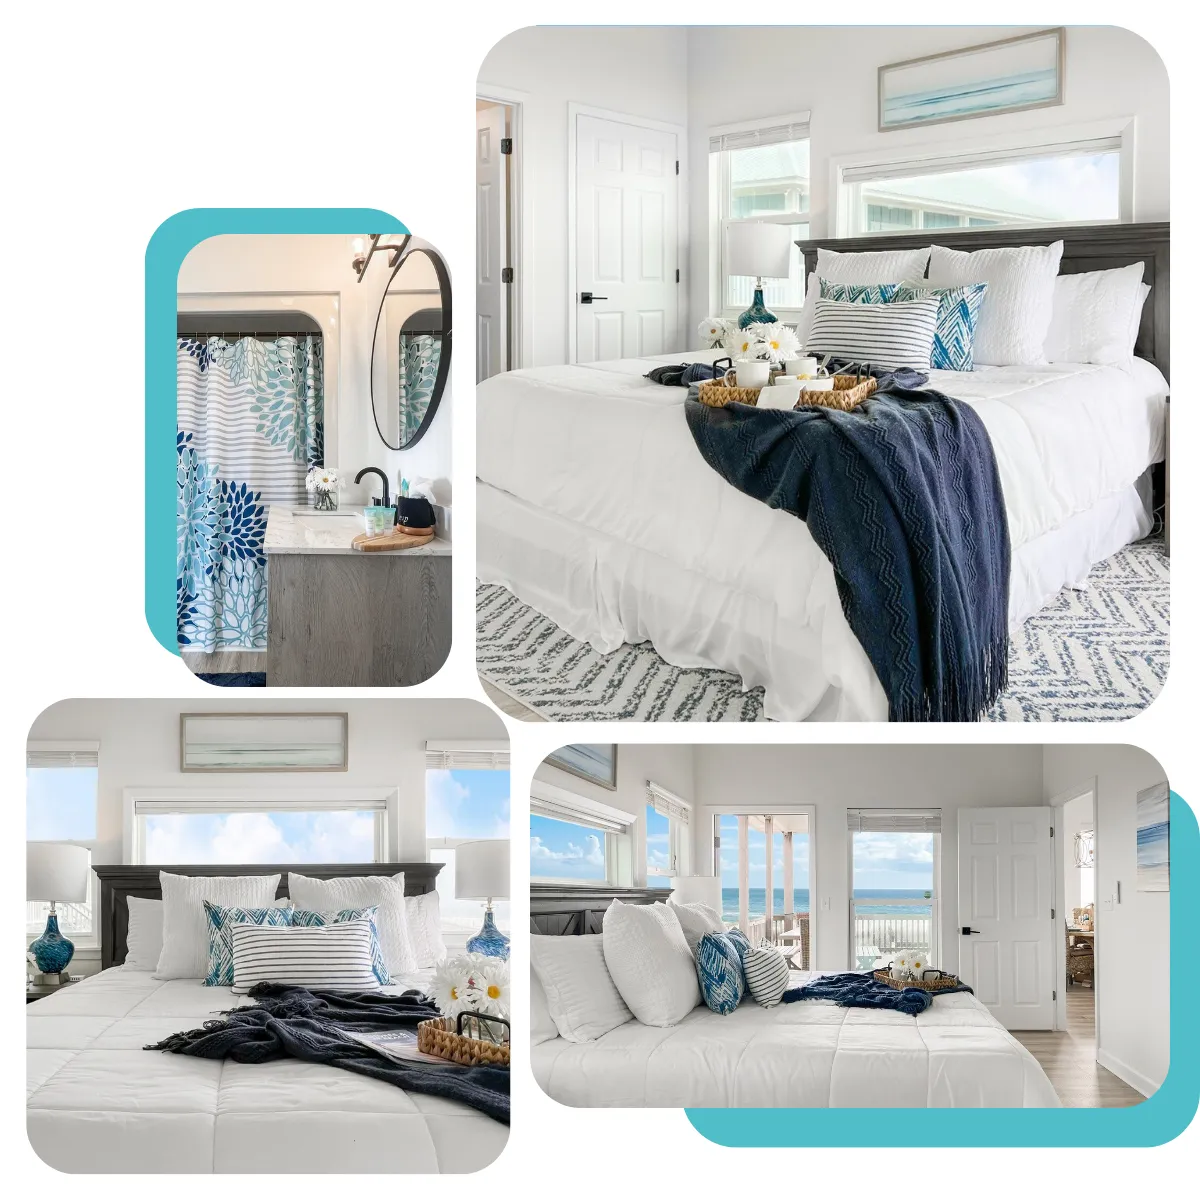 At Surfside Paradise, enjoy two elegant king suites, each with its own deck, ocean views, and private bathroom. Relax with 43" Smart TVs in both master bedrooms, while Bedroom 3 offers a snug space with bunk beds and its own bathroom, perfect for families or groups.